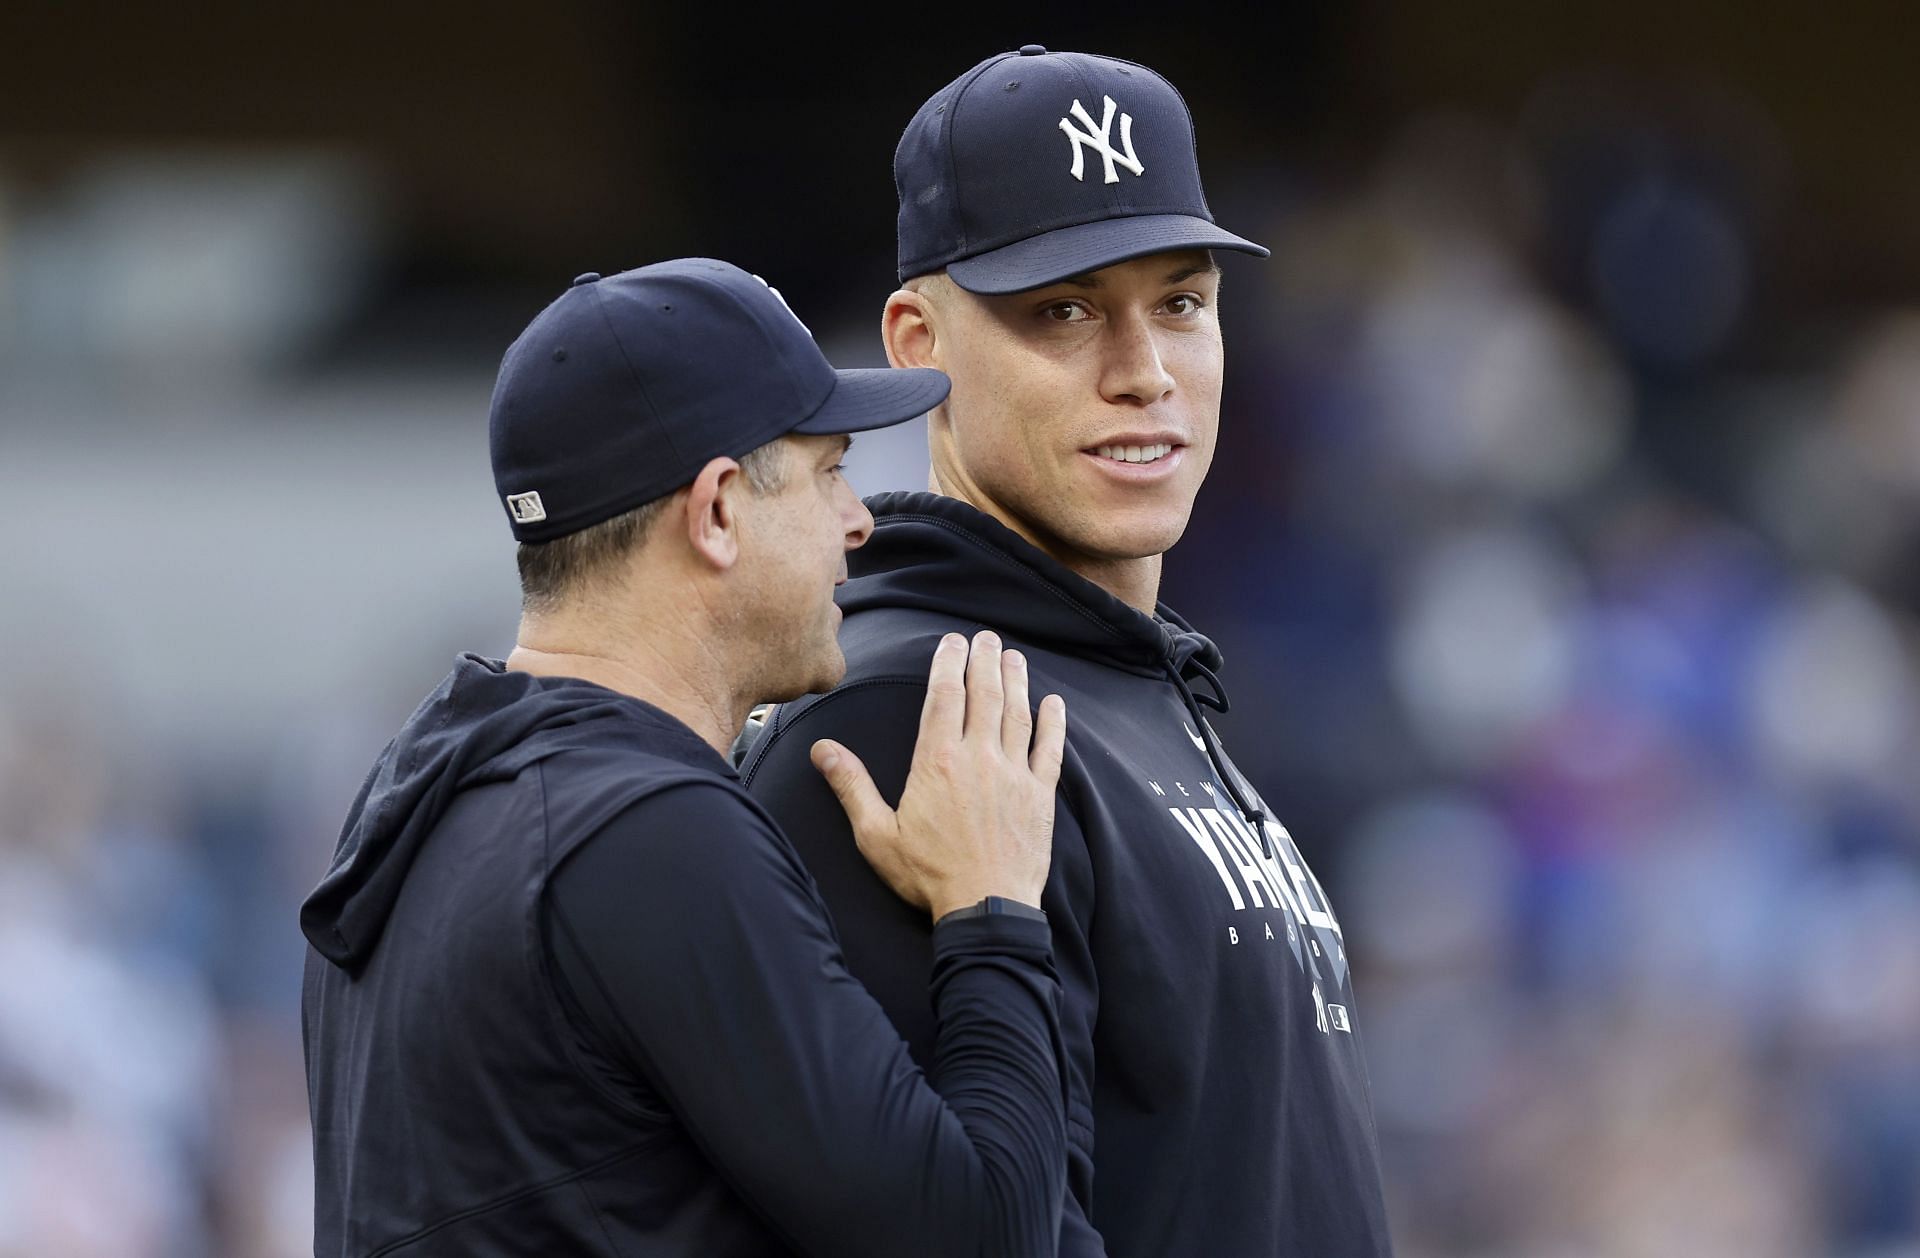 Aaron Judge (R) and manager Aaron Boone of the New York Yankees celebrate after defeating the Texas Rangers at Yankee Stadium